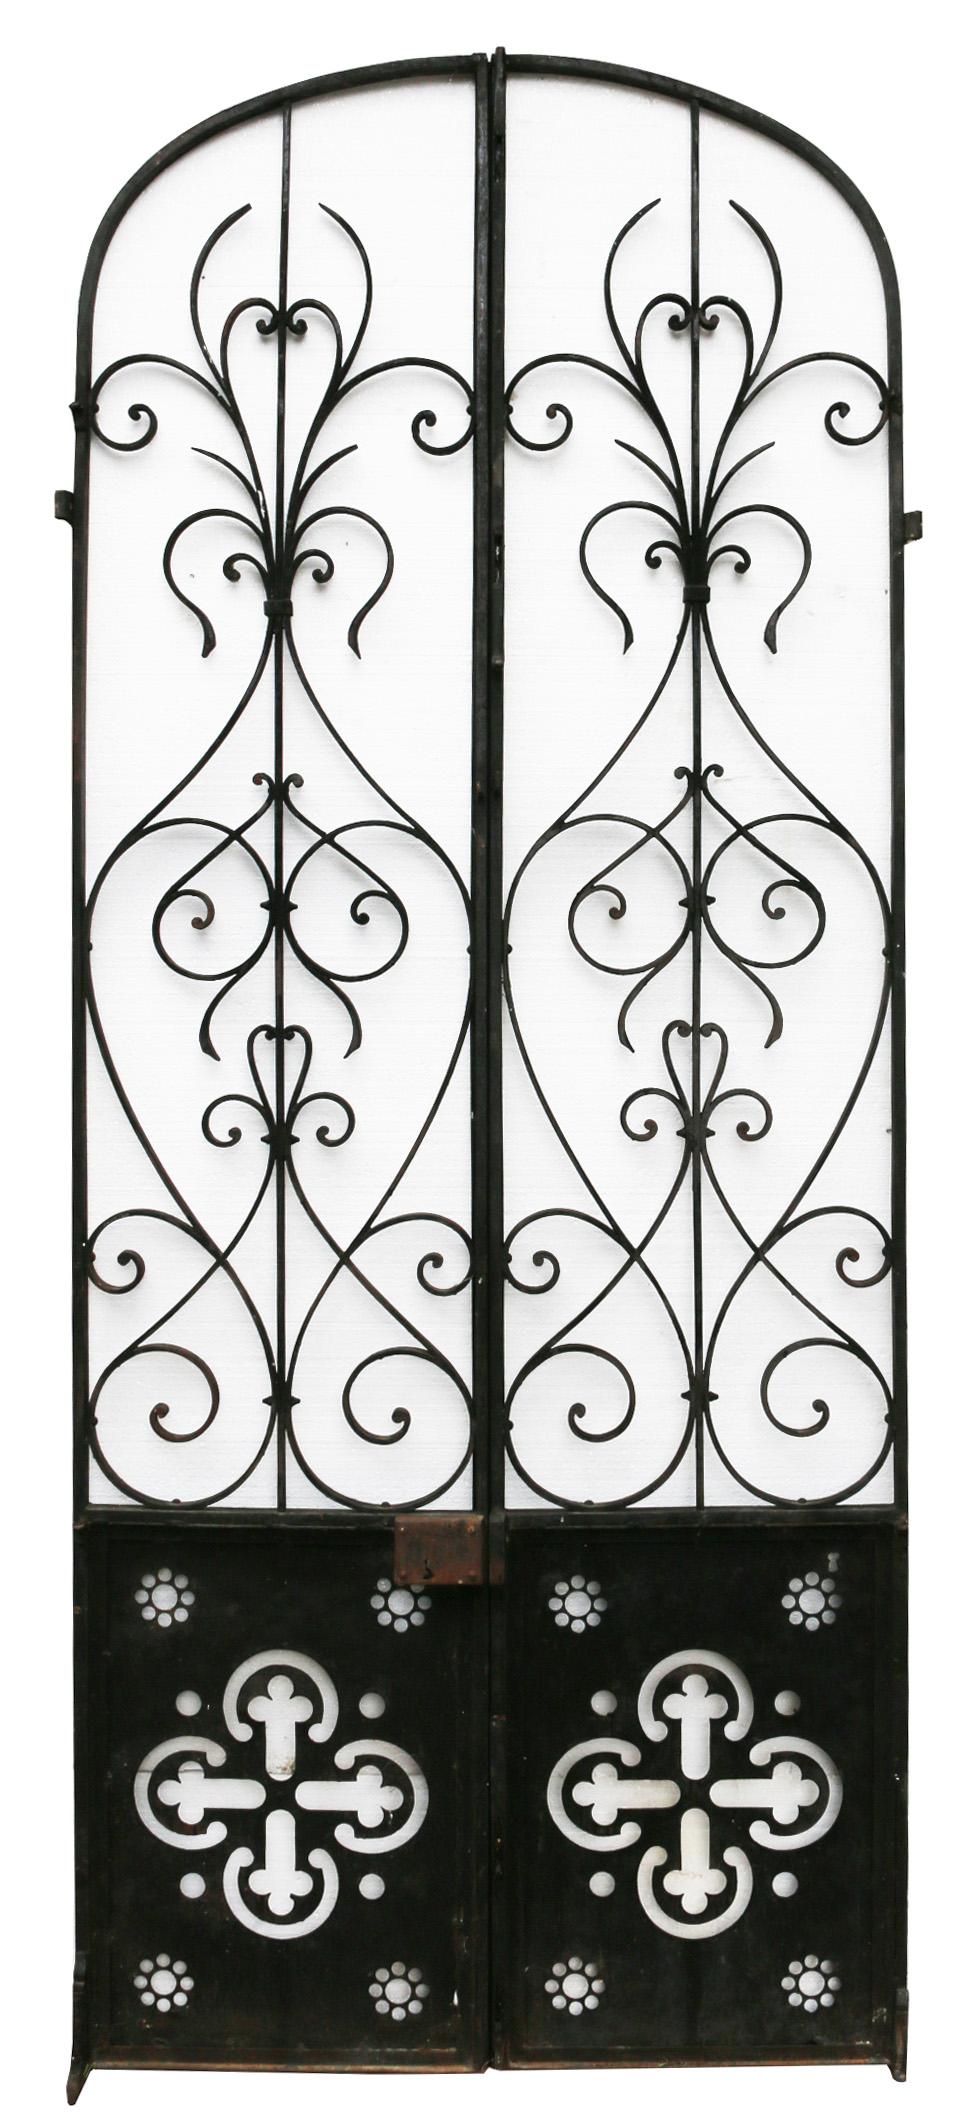 Set of Antique Wrought Iron Arched Gates In Good Condition For Sale In Wormelow, Herefordshire